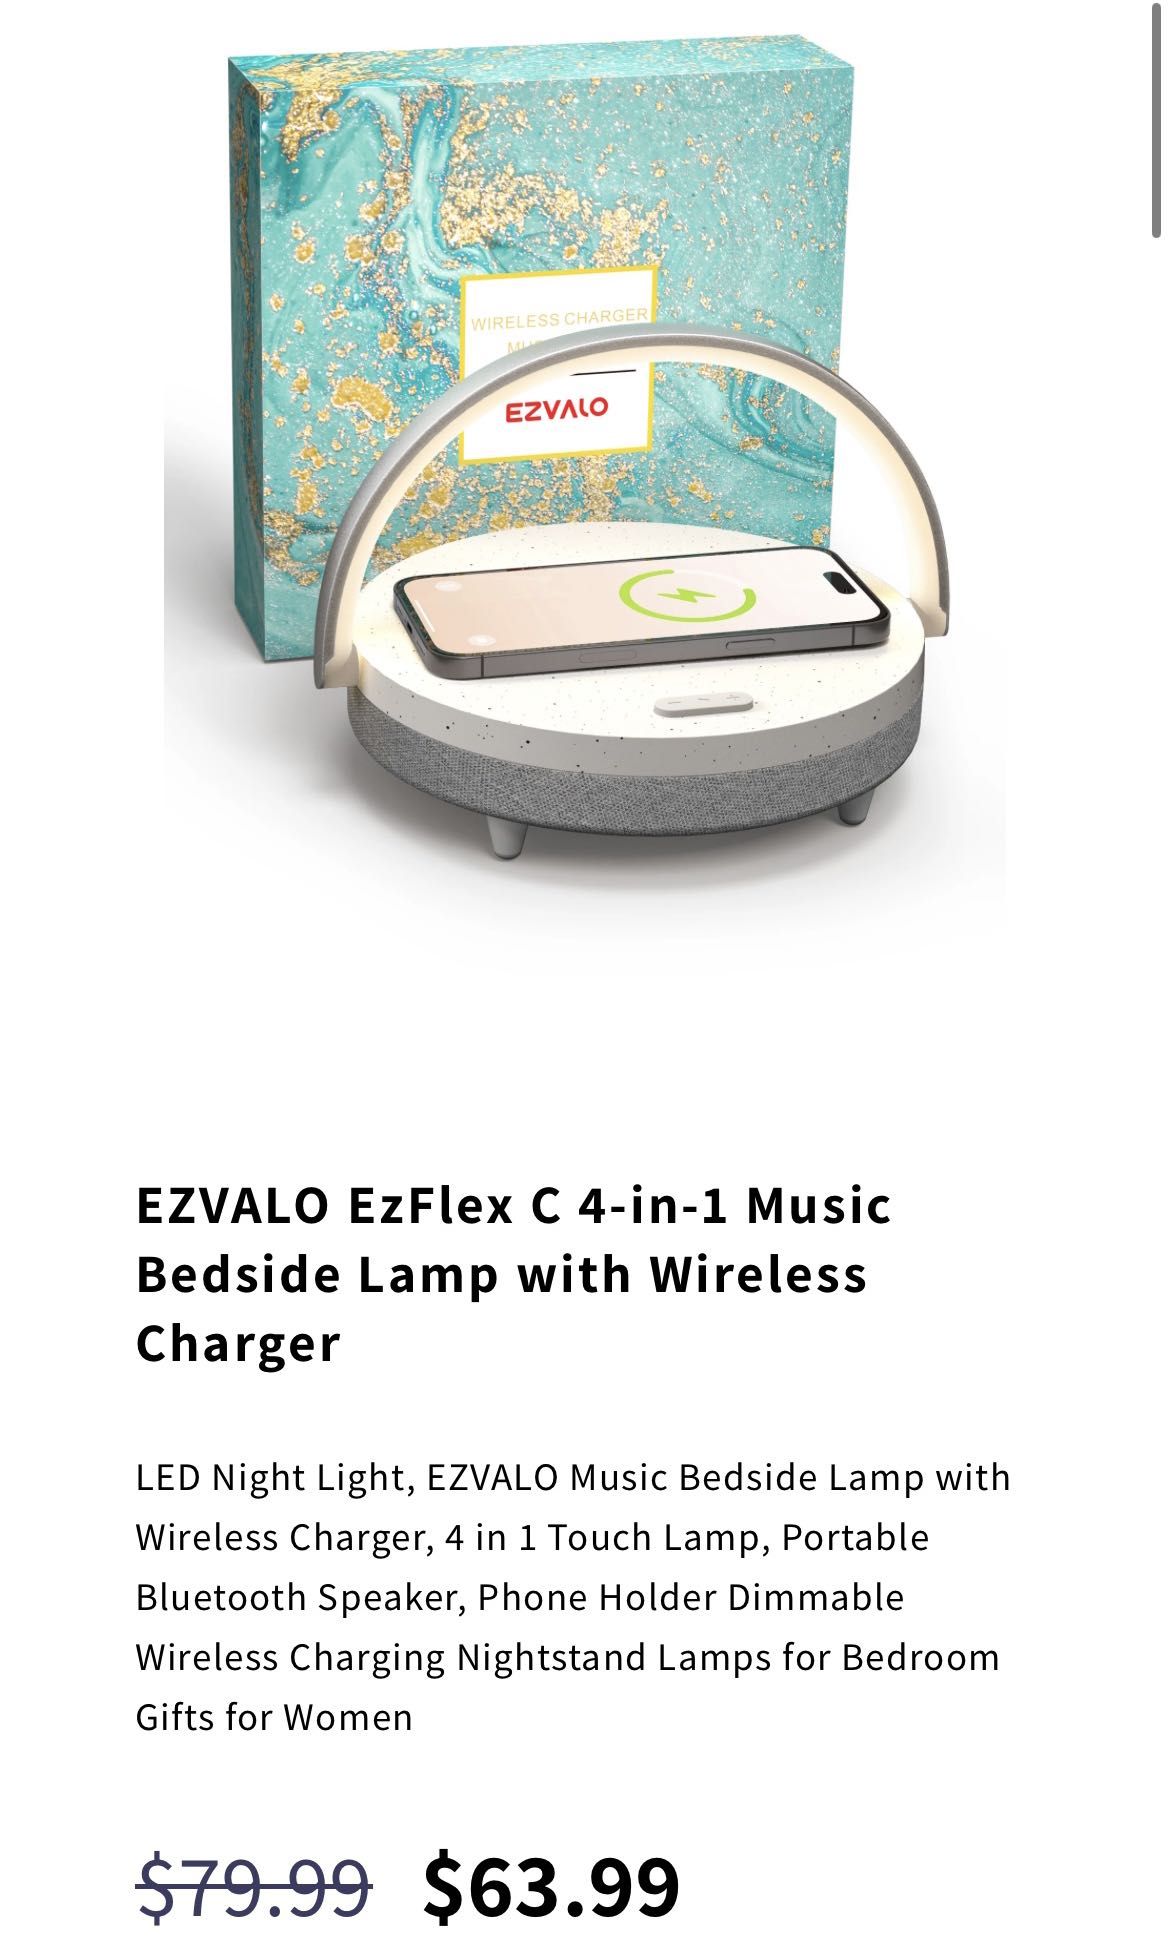 EZVALO LED Night Light, Music Bedside Lamp with Charger, 4 in 1